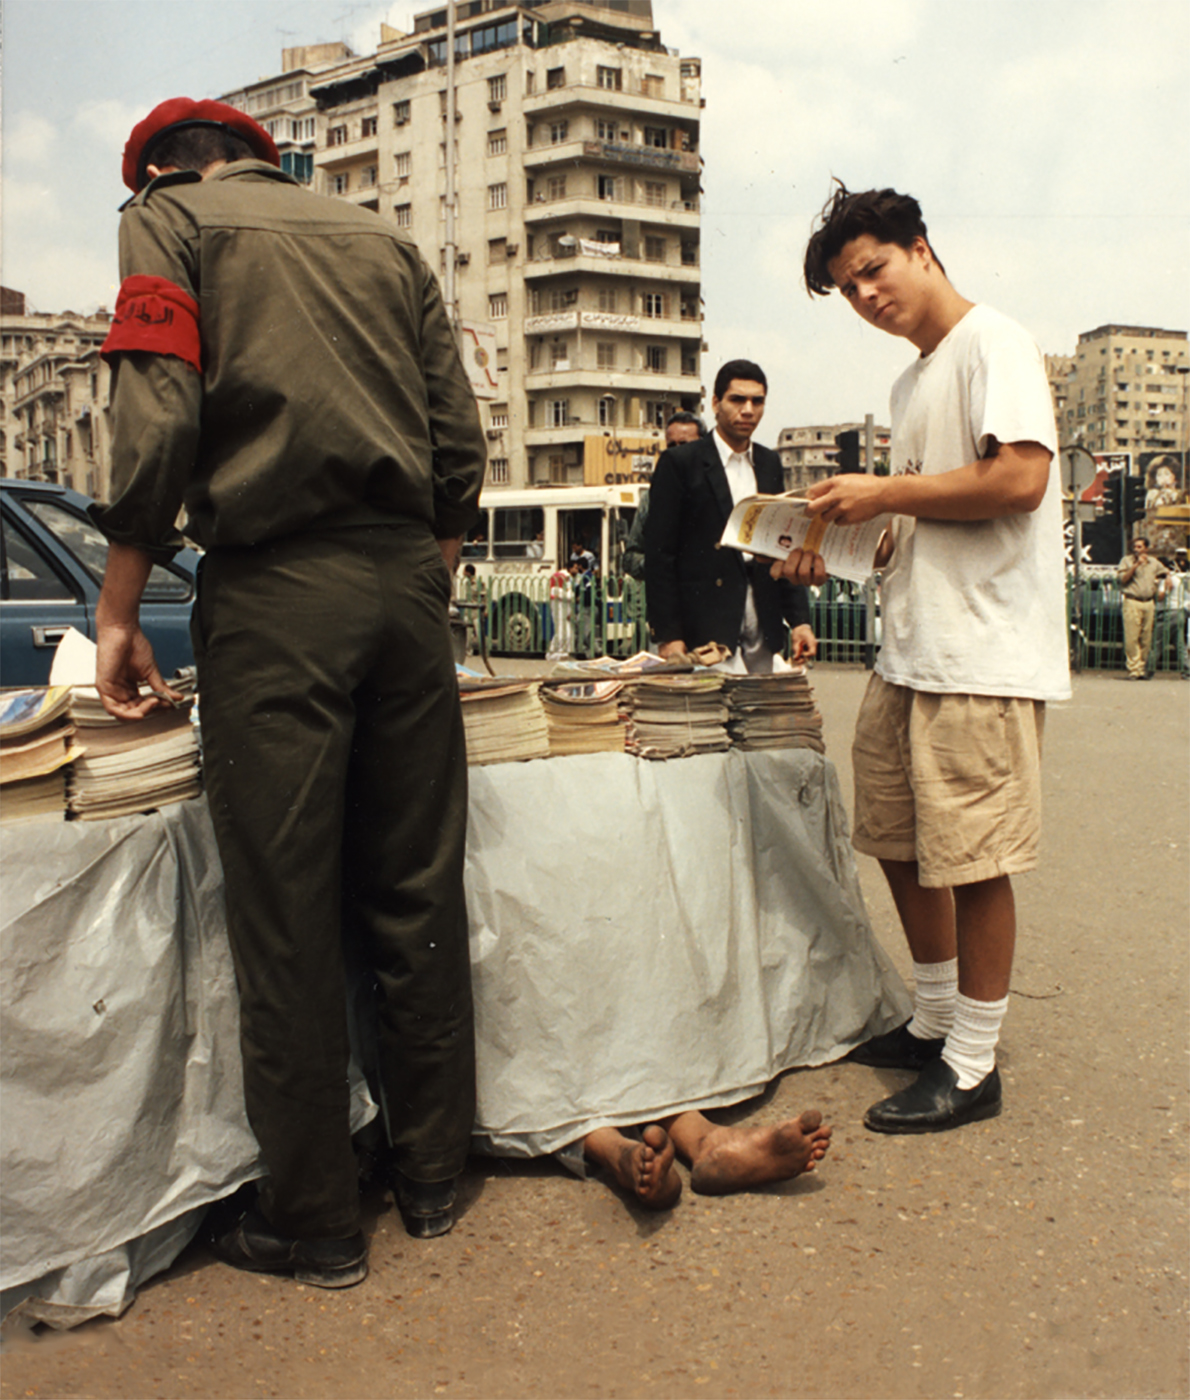 Roko, Tahir Square, Cairo, during the "Year On" in 1992. Notice the stray pair of feet.